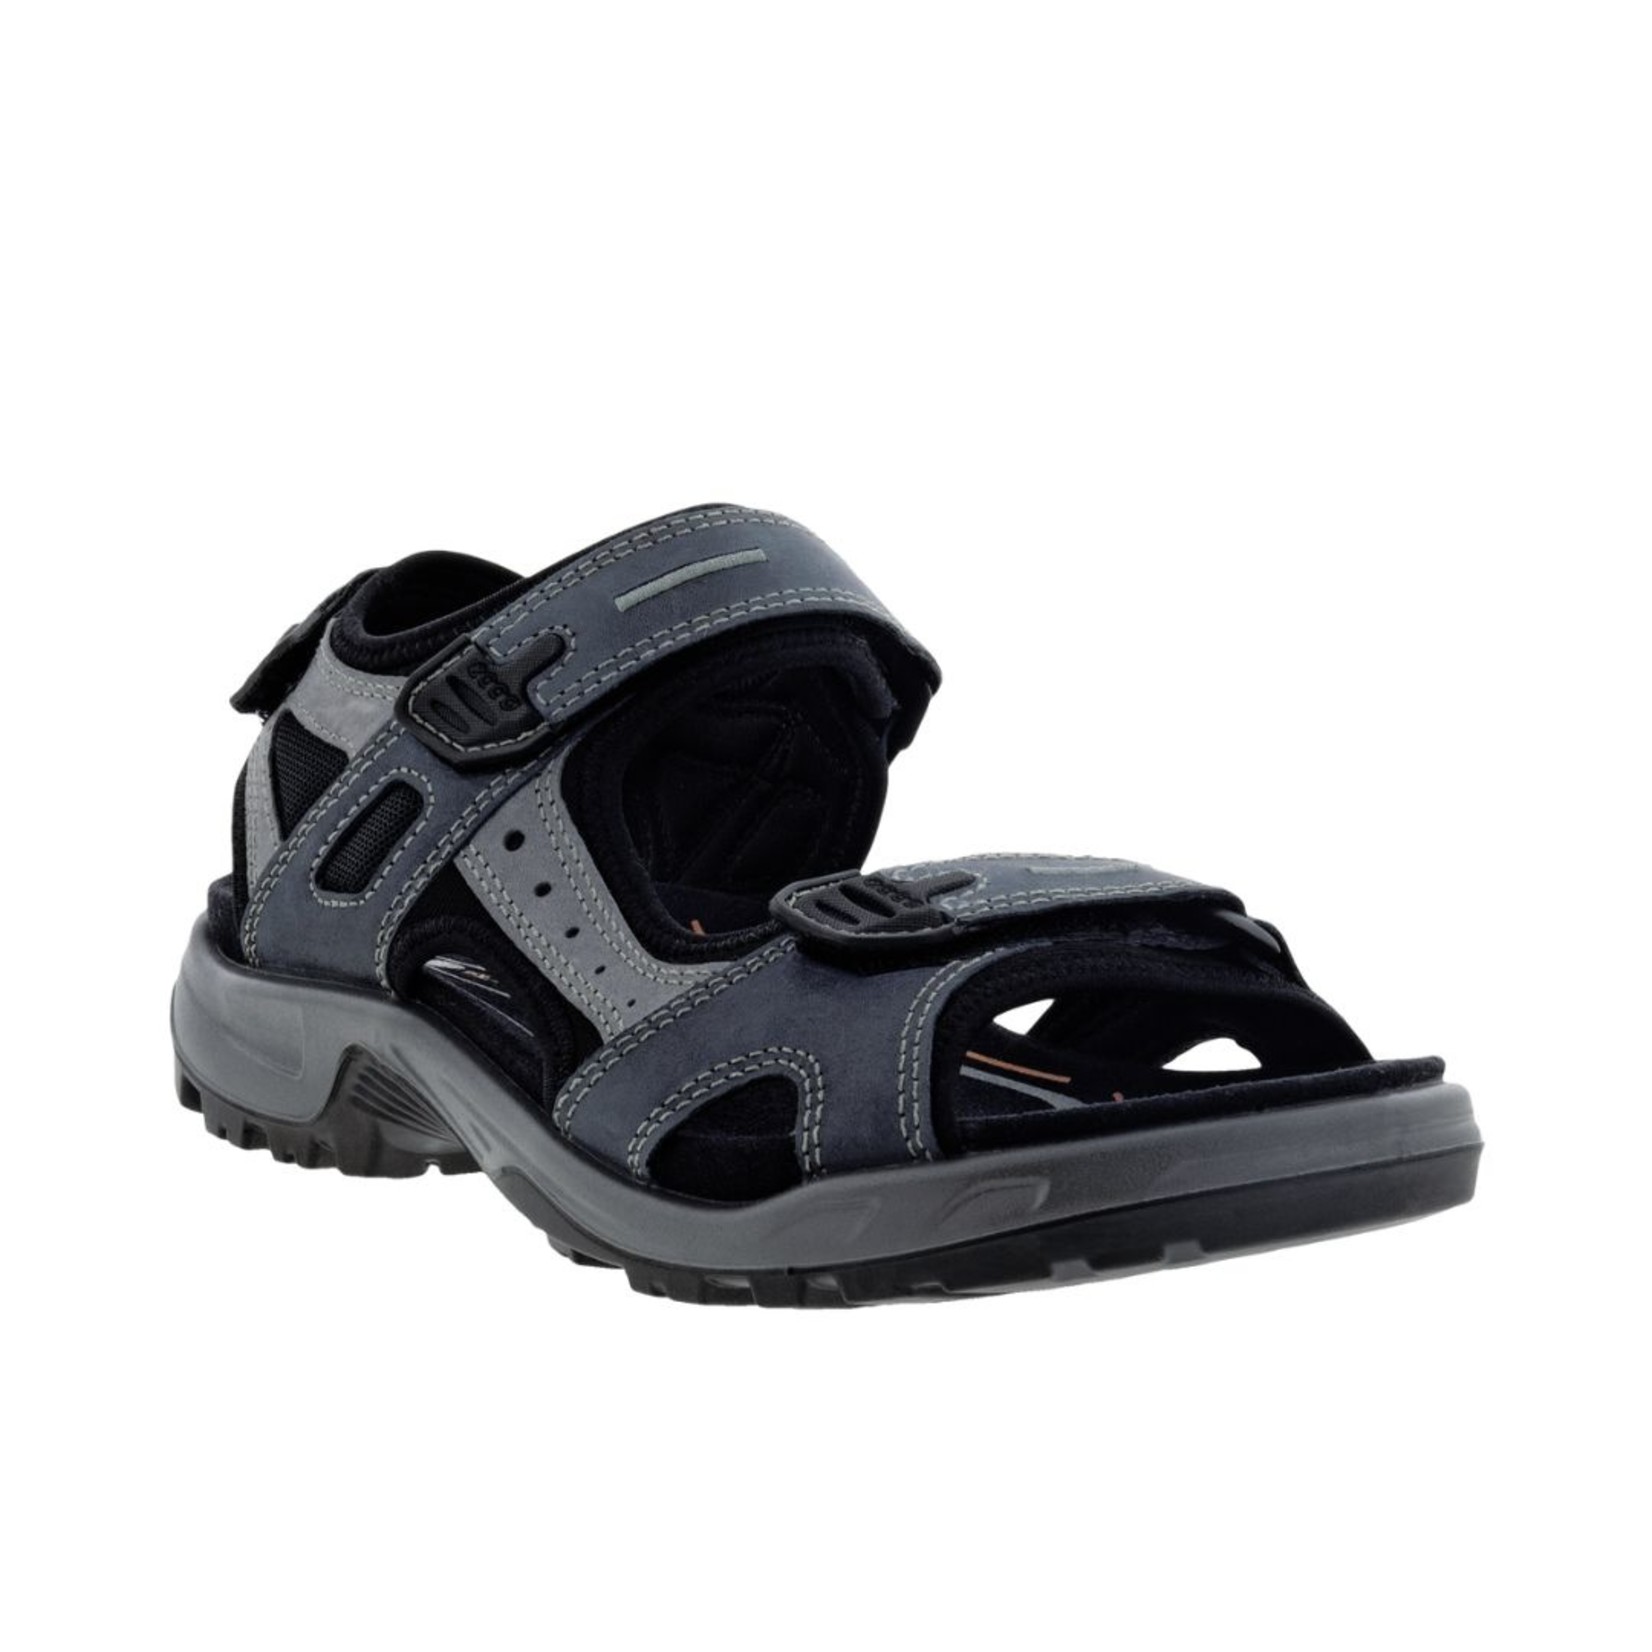 broderi Charmerende Ulydighed Ecco Yucatan Men's Sandals - Shippy Shoes